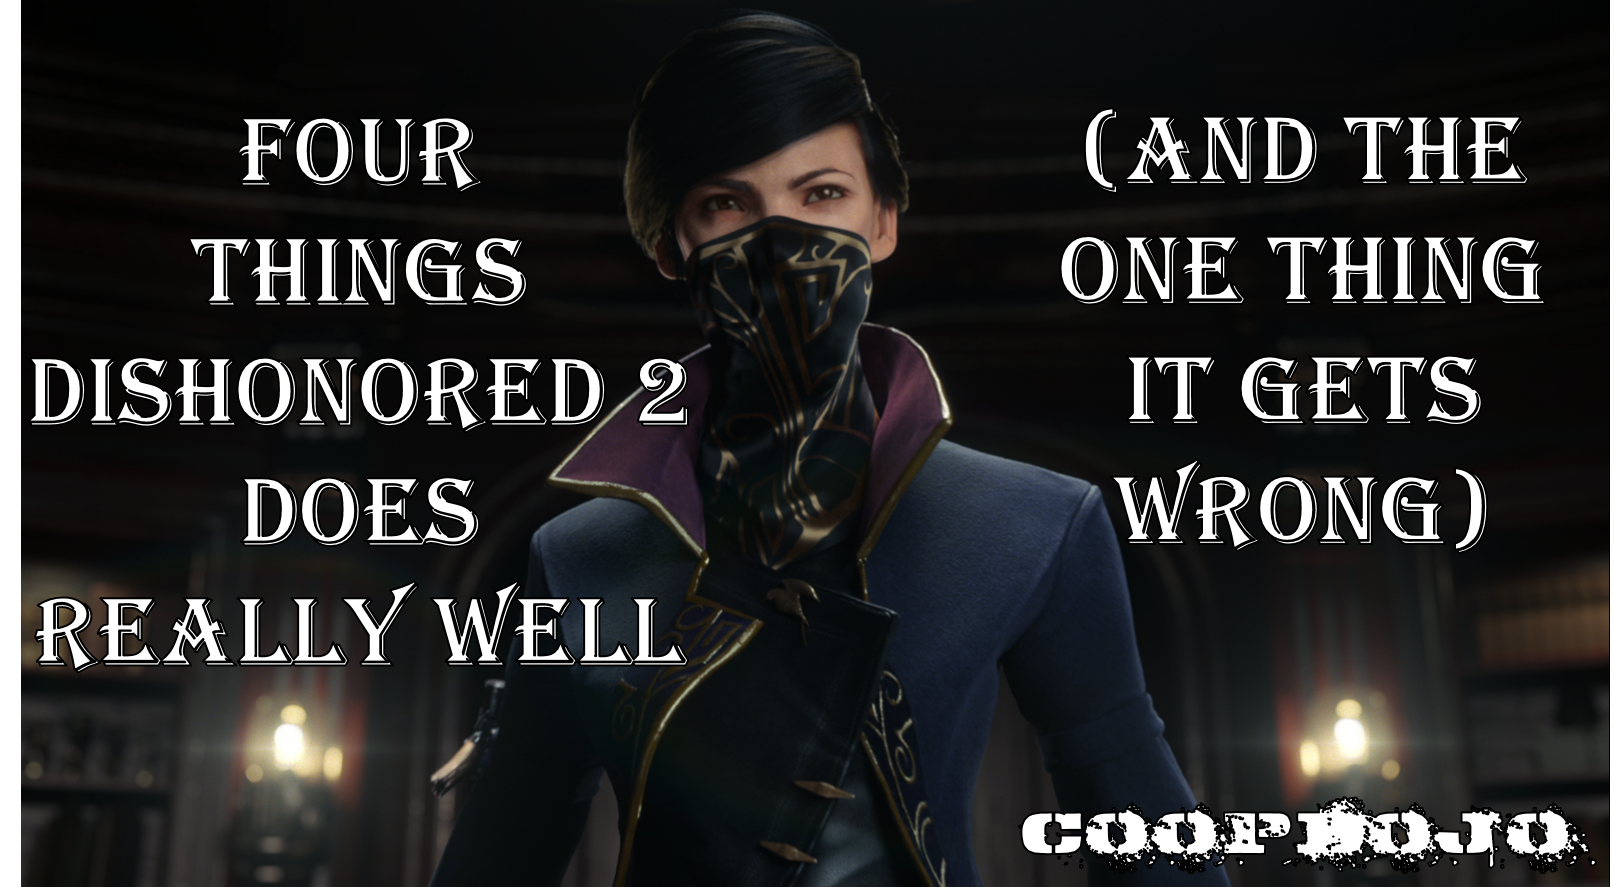 Four Things Dishonored 2 Does Well (and One Thing It Gets Wrong)